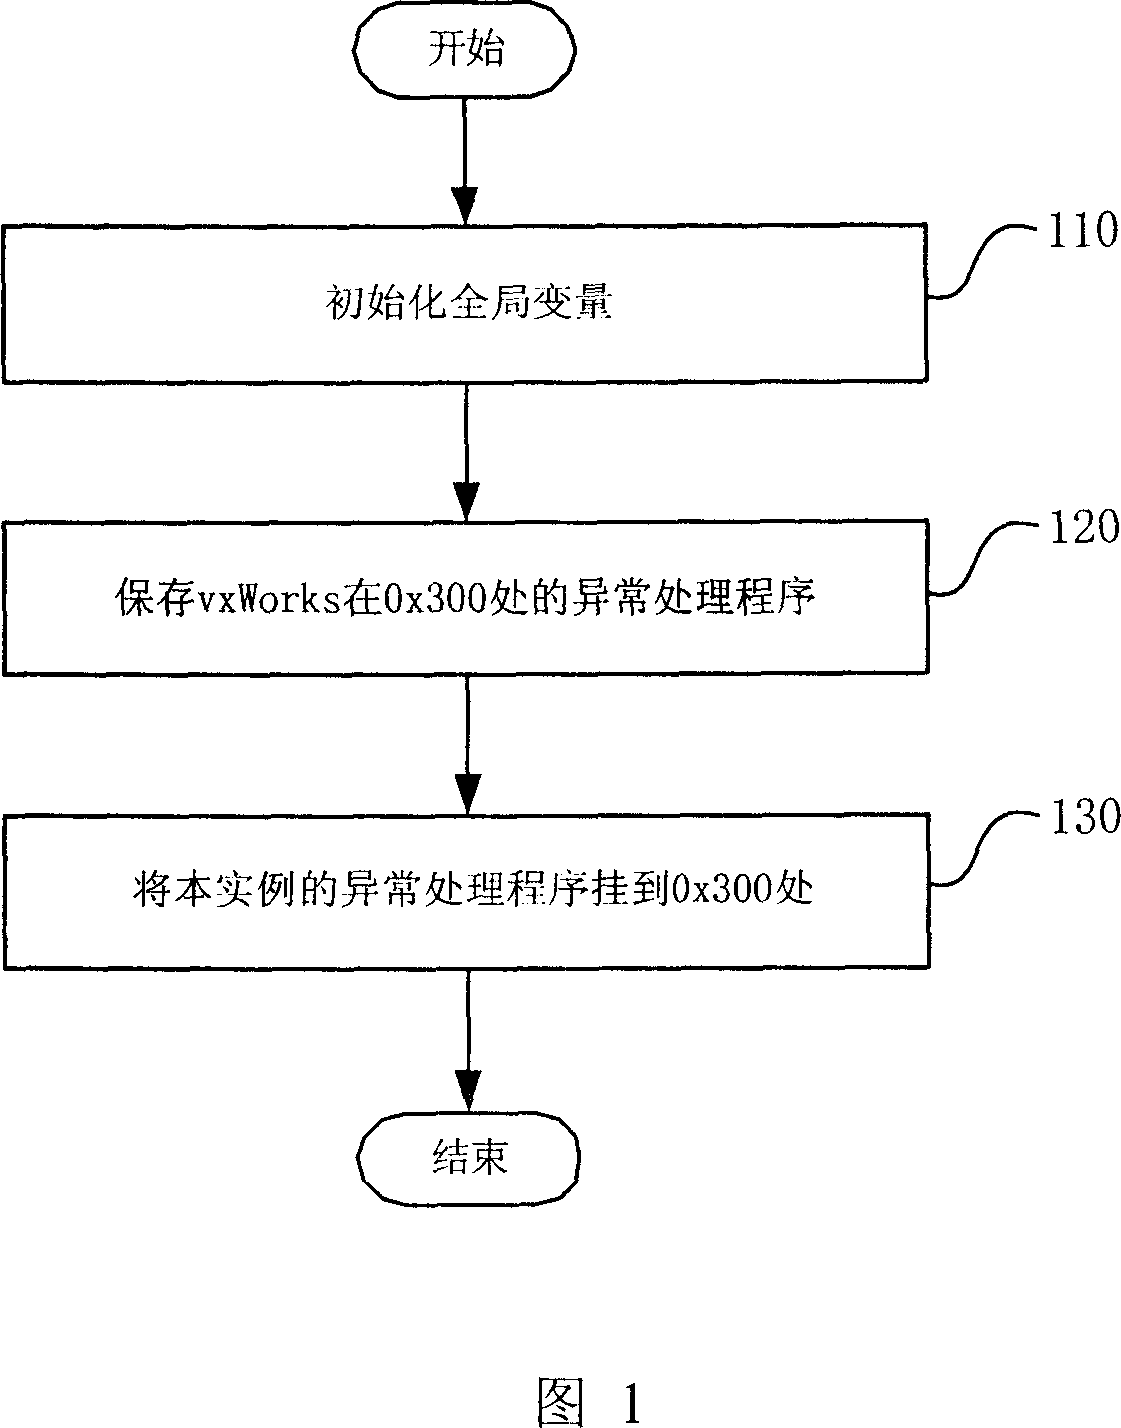 Detecting method for illegal memory reading and writing